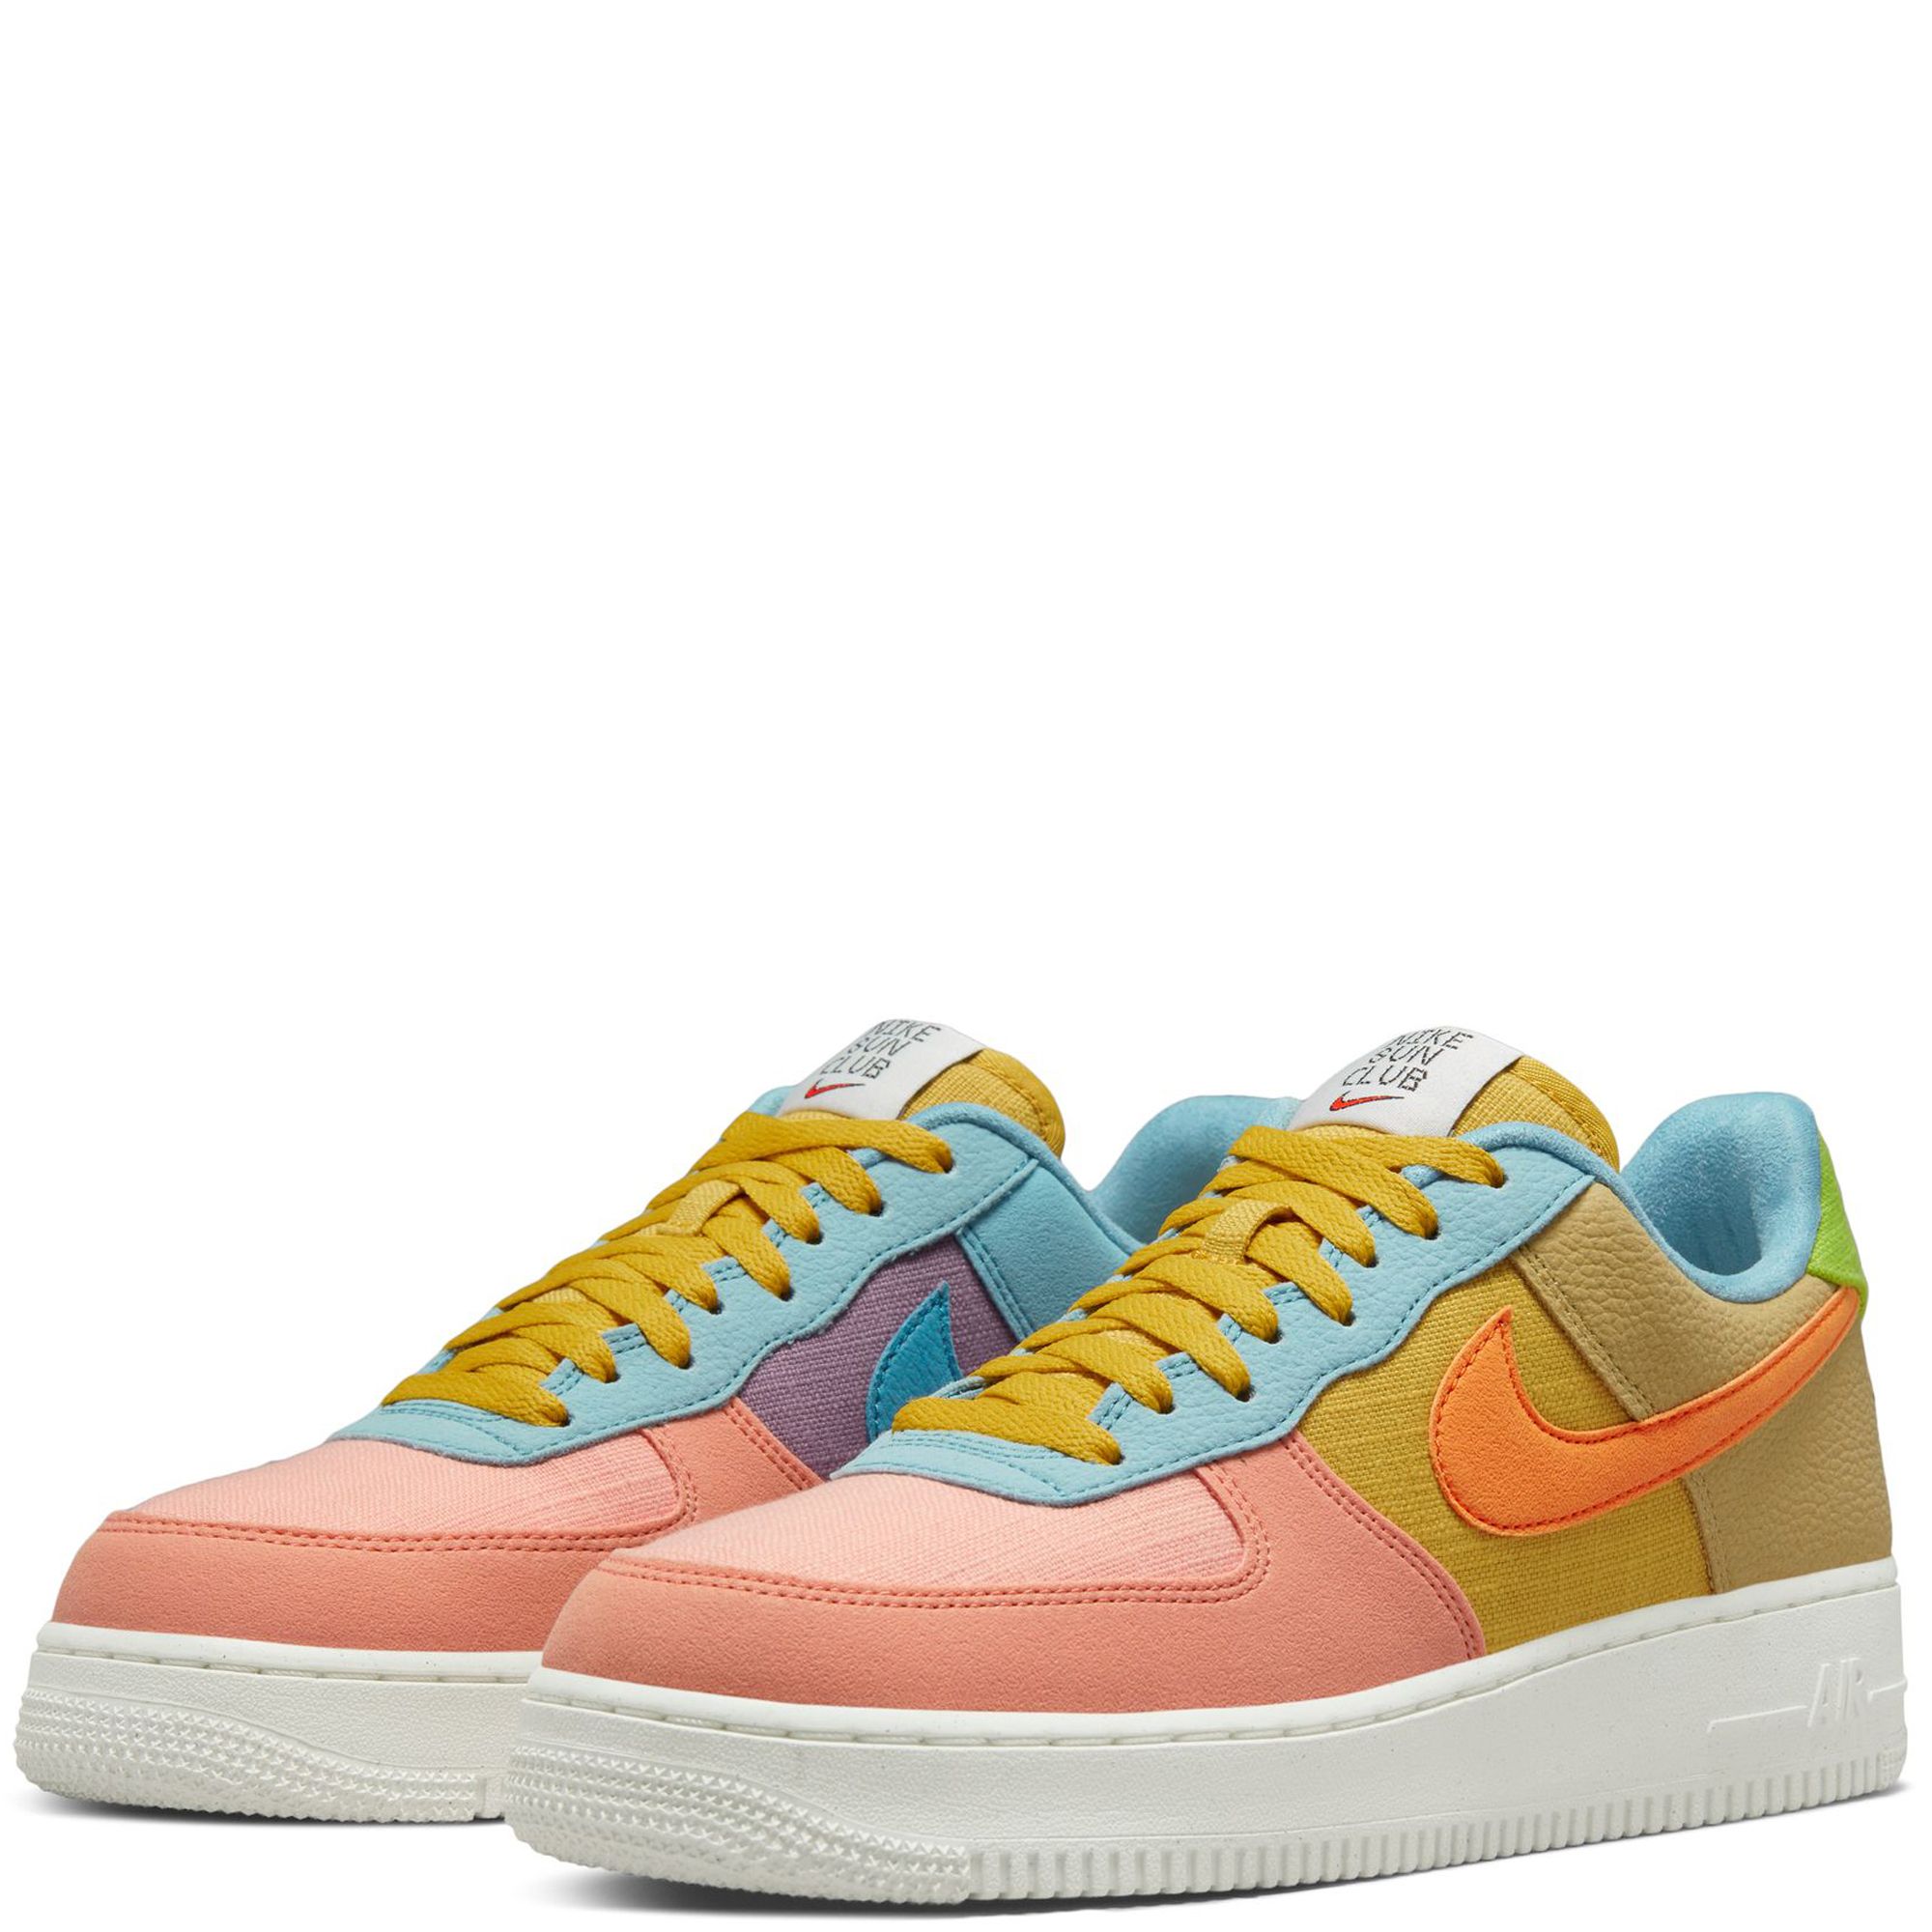 Nike Air Force 1 Low LV8 Miami Vice (GS)